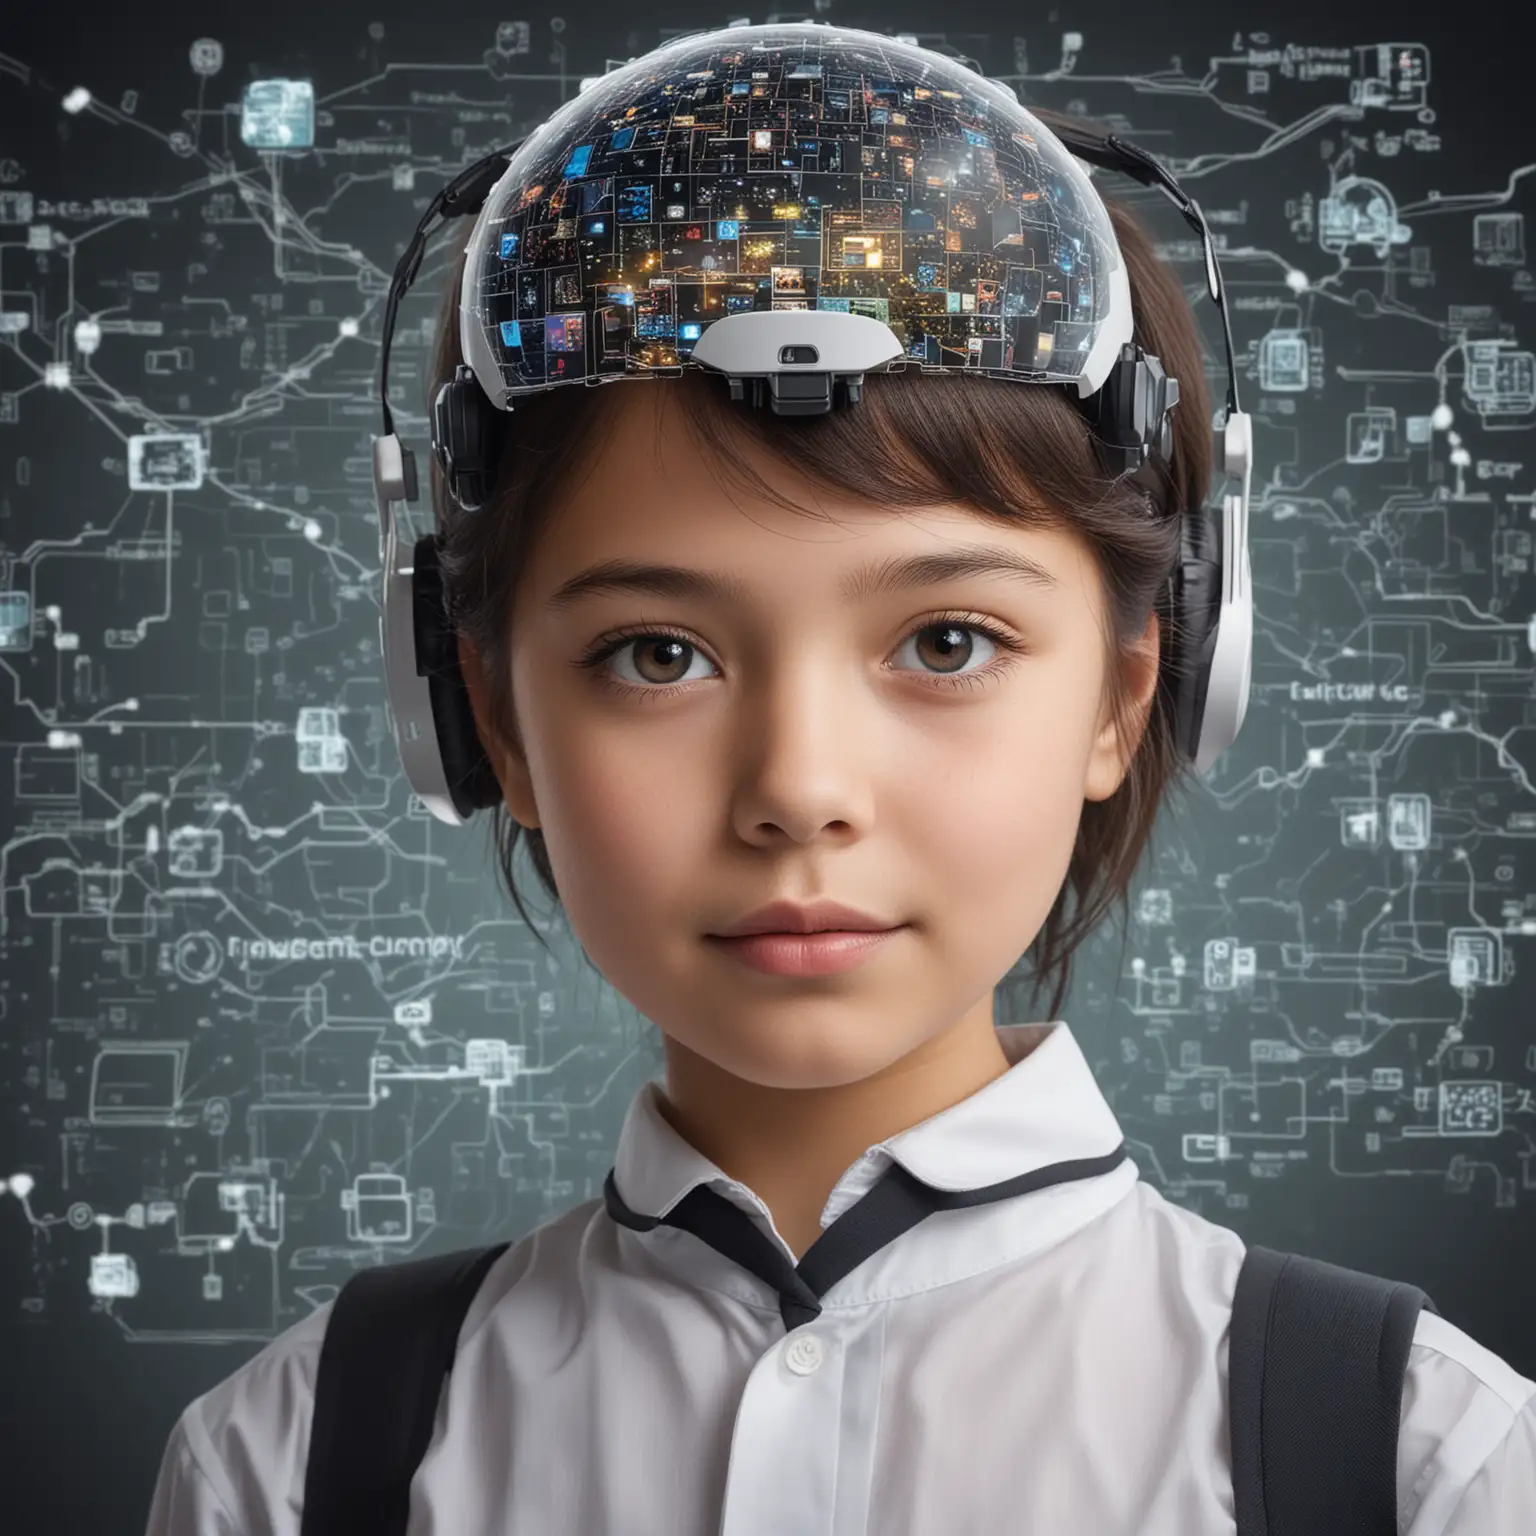 envision an image that combines the concepts of school, ai, innovation, and solutions
